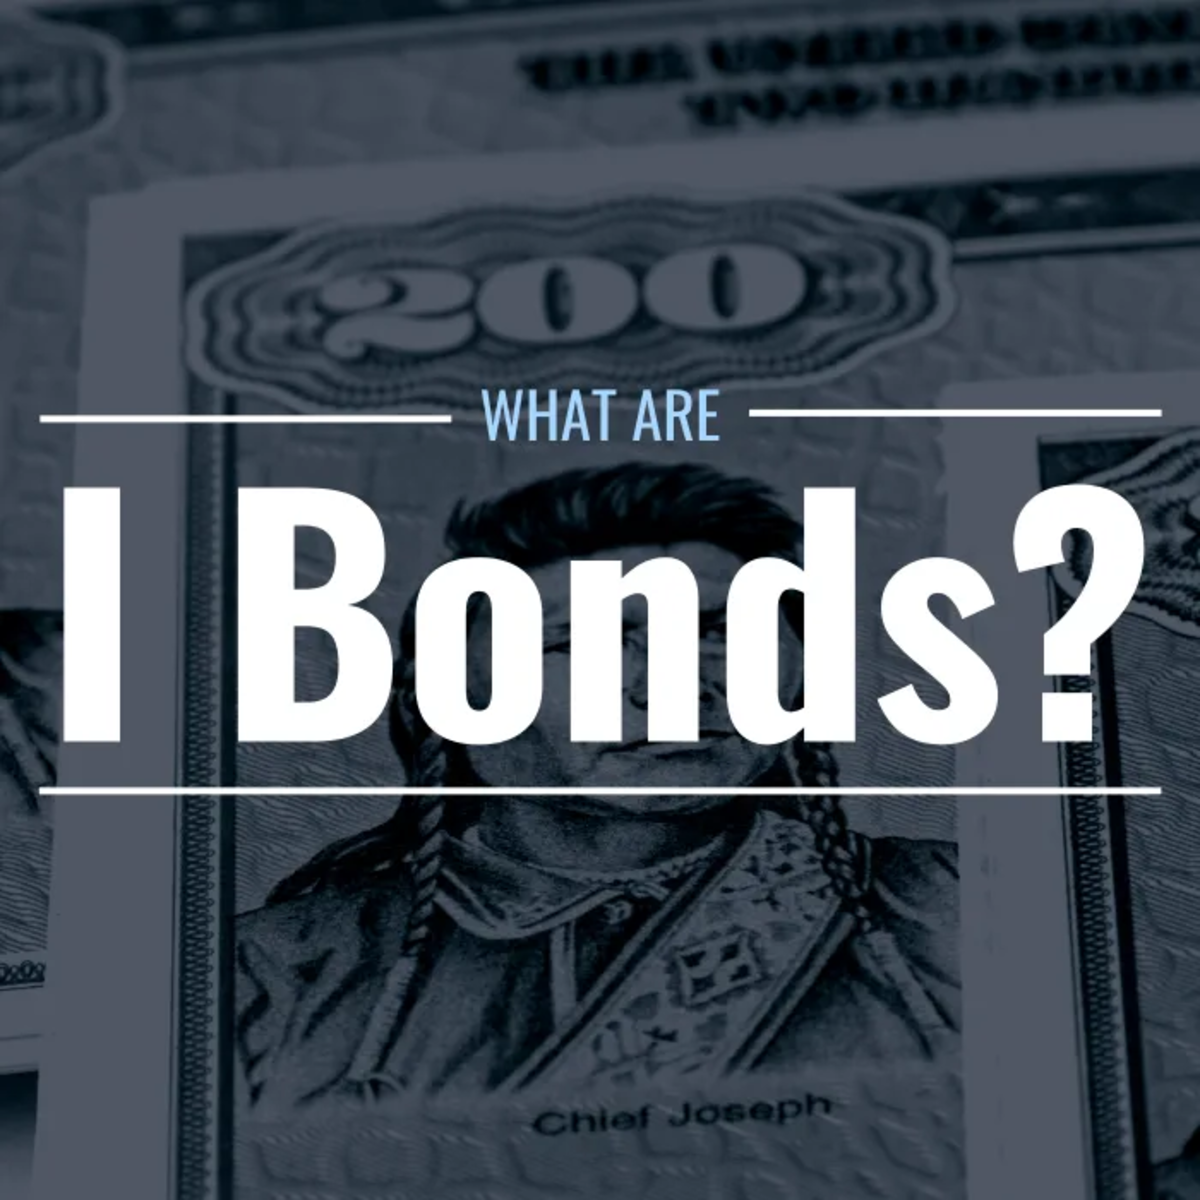 A Beginner's Guide to Buying I Bonds: Step-by-Step Instructions for Purchasing Inflation-Protected Bonds